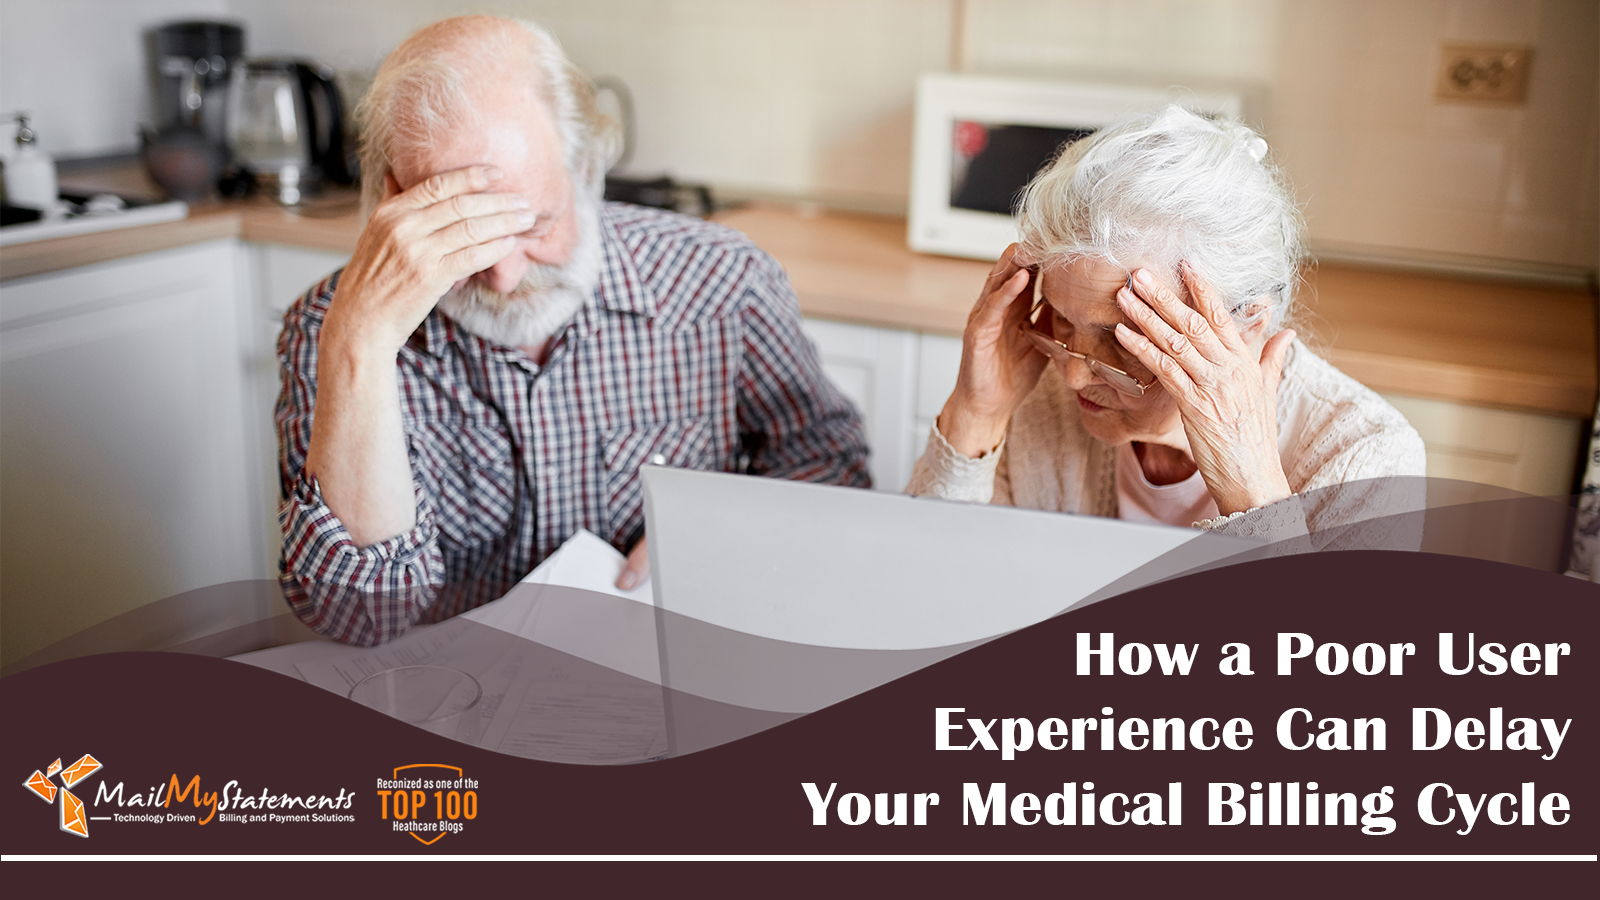 How a Poor User Experience Can Delay Your Medical Billing Cycle